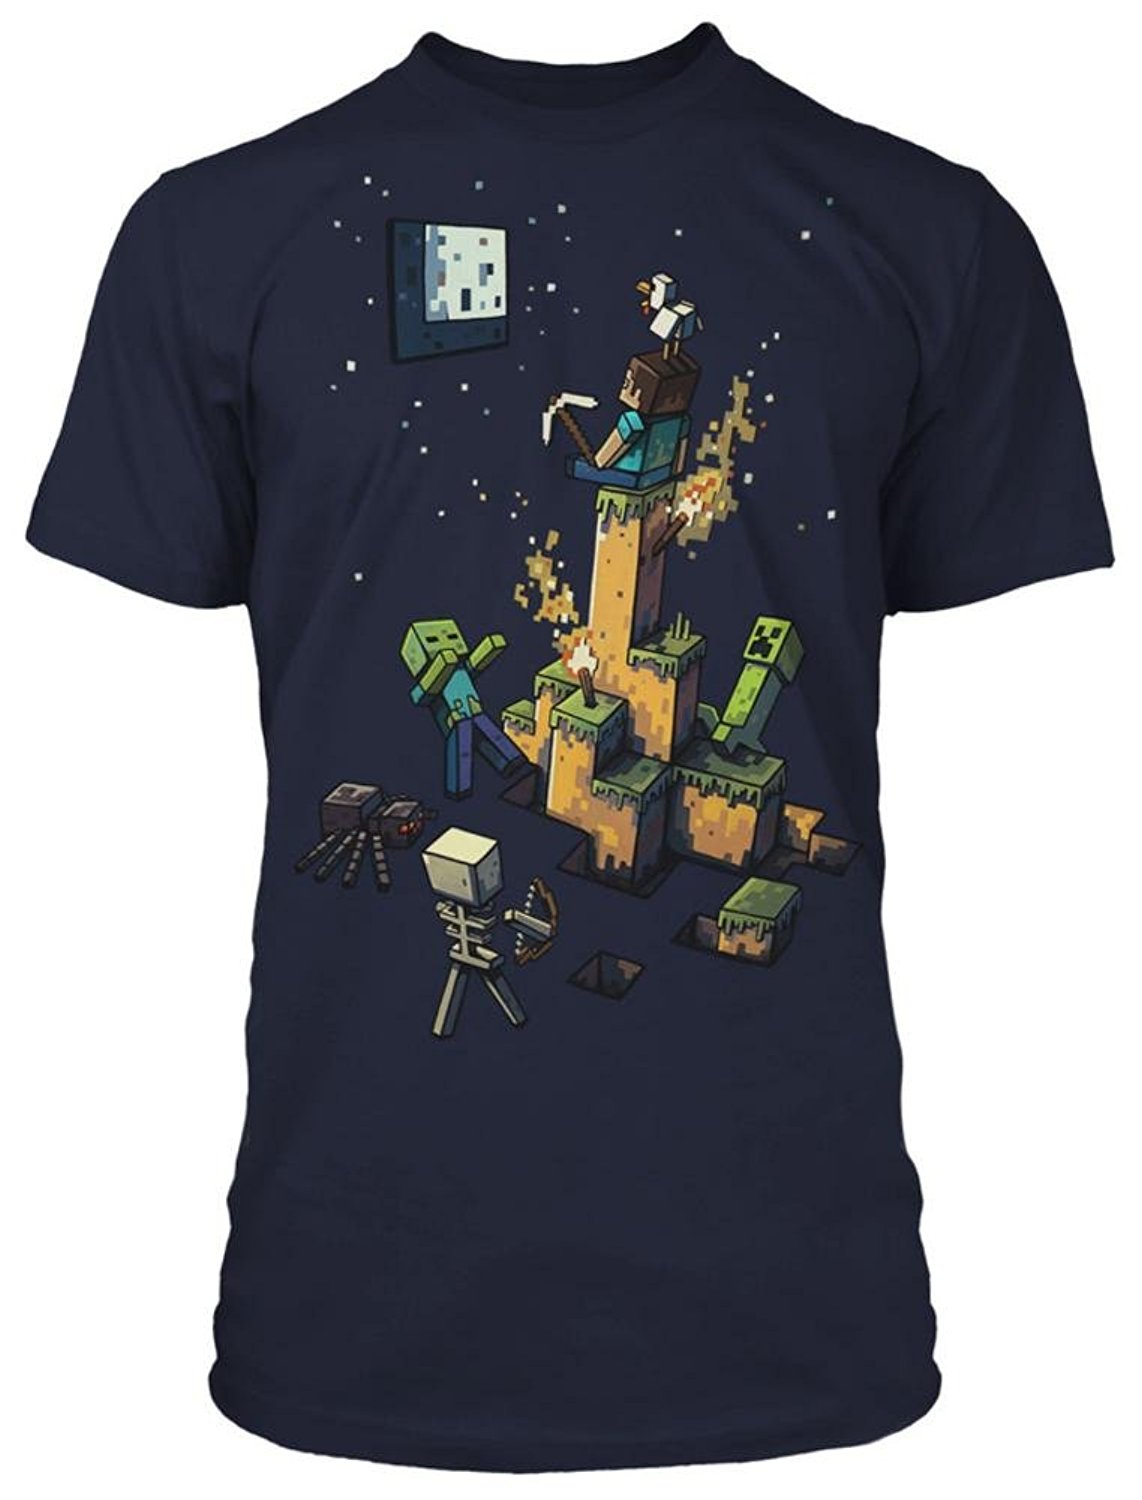 Boys Youth Tight Spot Minecraft Navy Premium T-Shirt Steve Creeper Zombie Skeleton Spider Torch Pickaxe Axe Character Graphic Video Game Tee - image 1 of 1